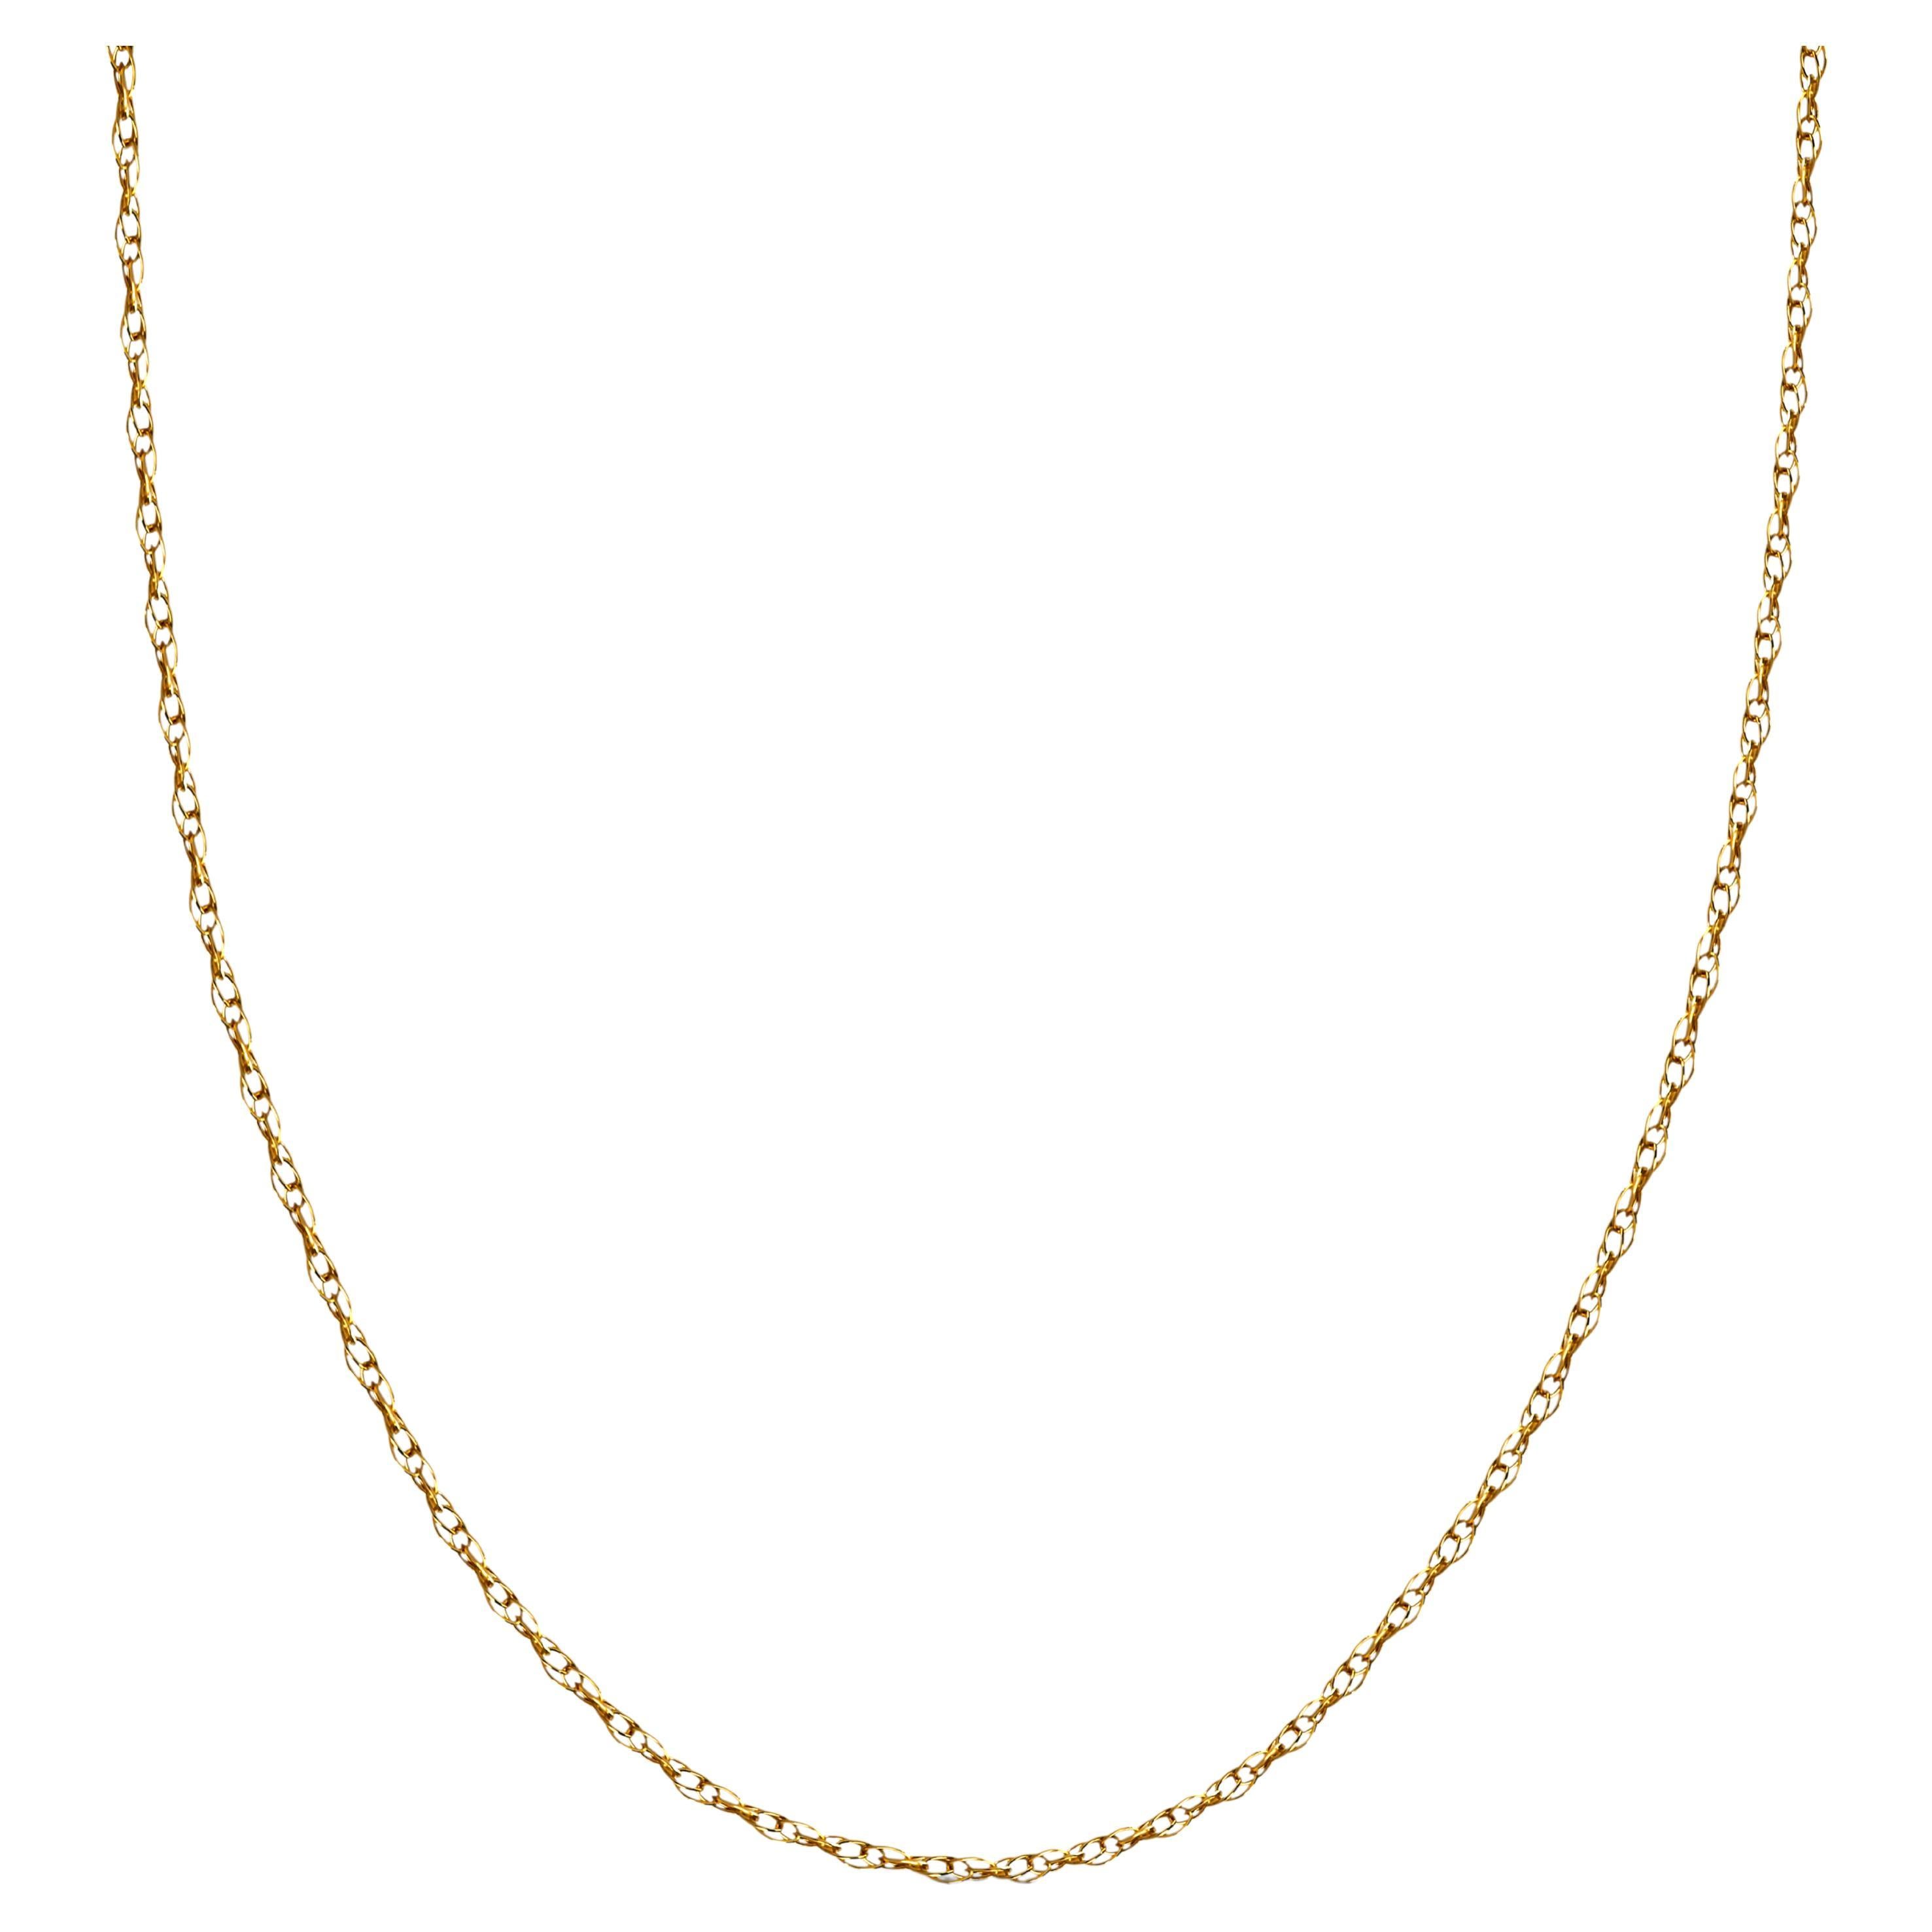 Real Solid 14k Yellow Gold Rope Chain Necklace Diamond Cut Women Pendant Ear 